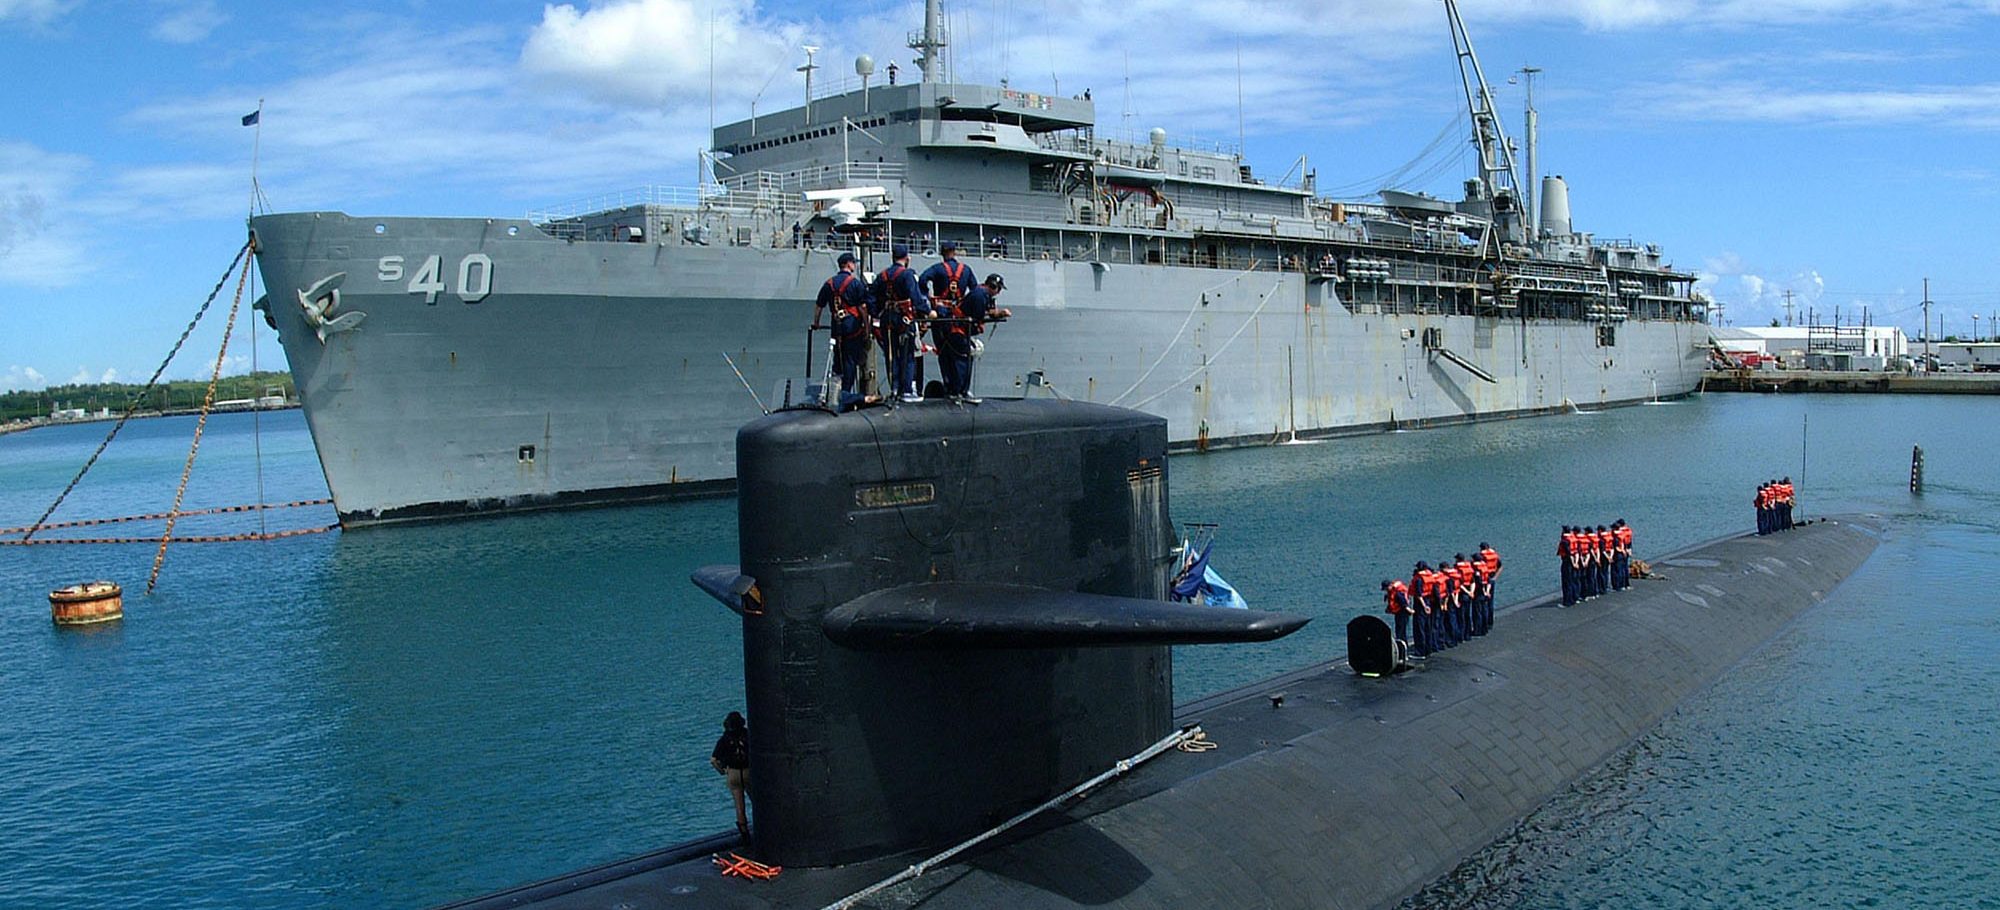 people standing on conning tower of submarine